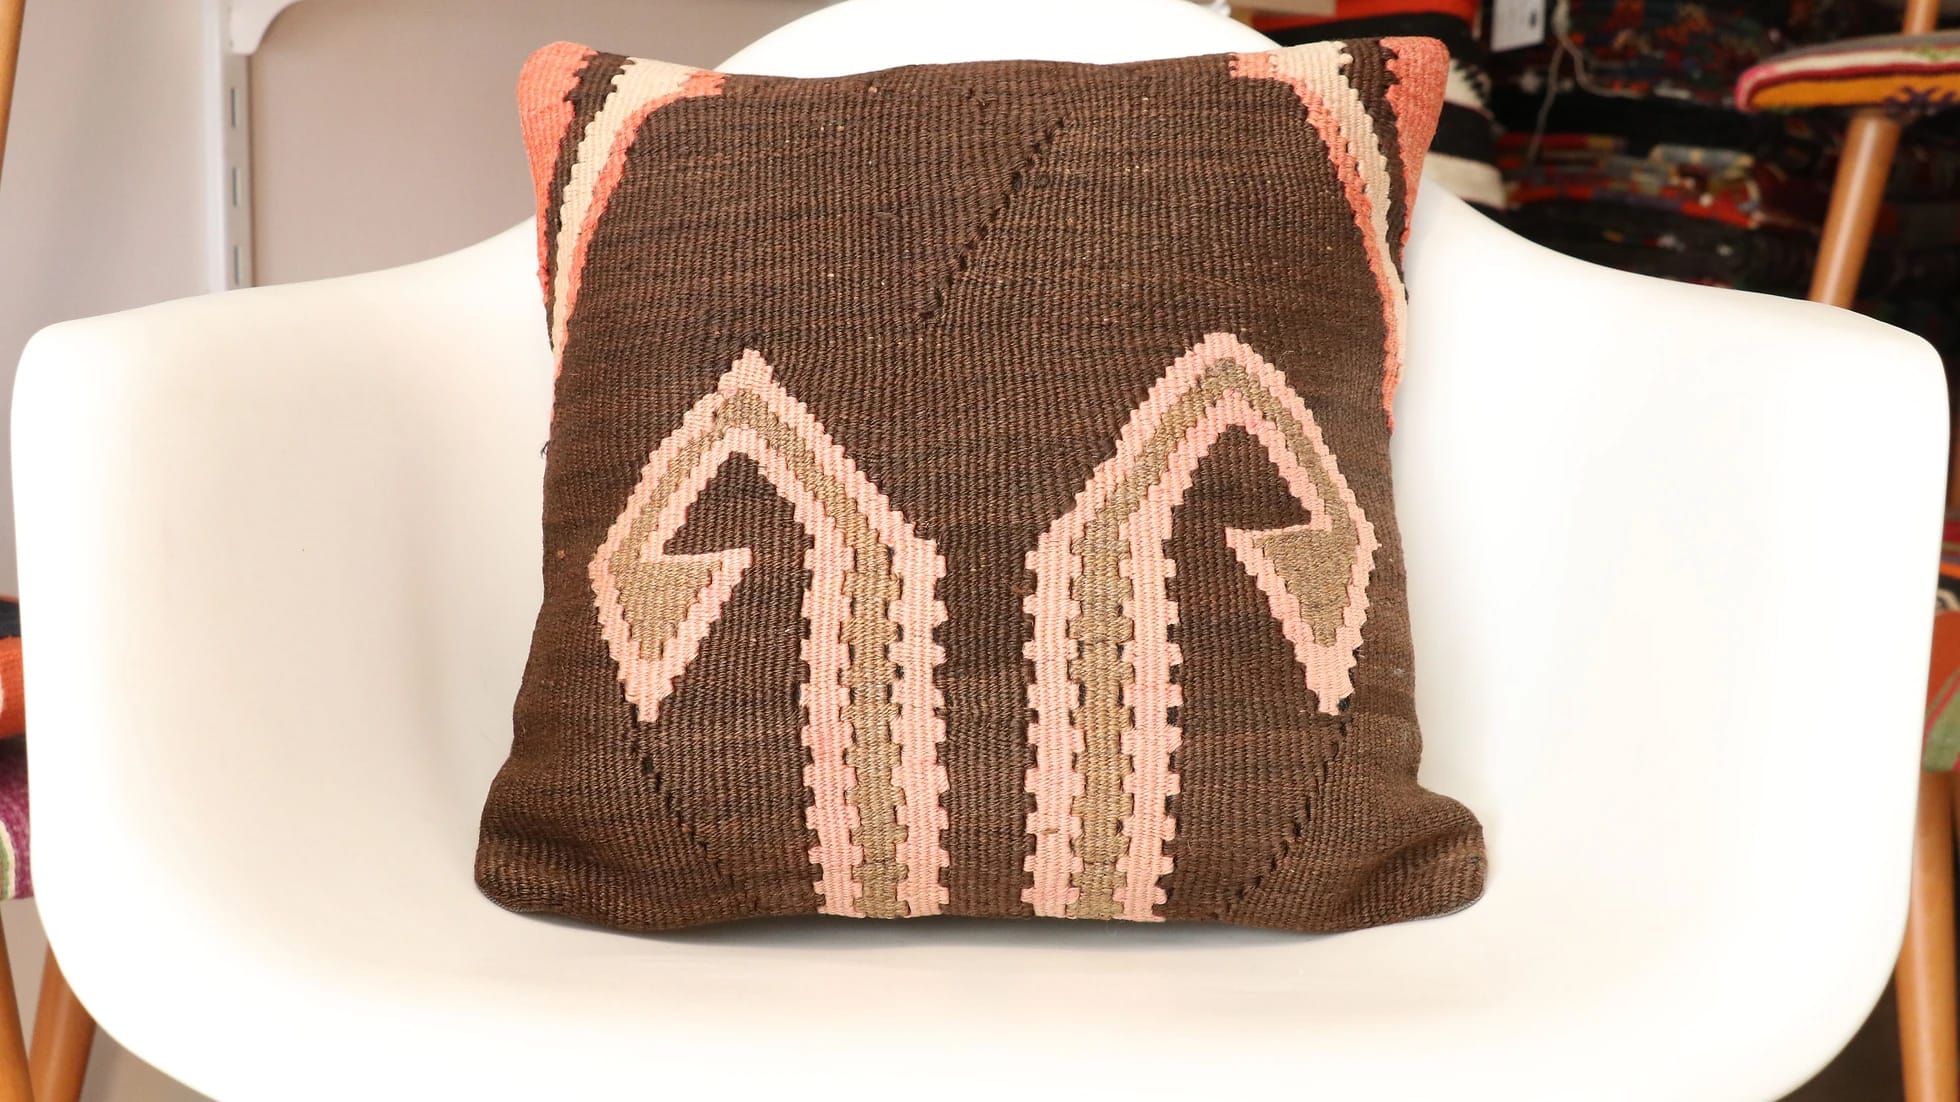 traditional kilim pillow made of vintage turkish rug featuring traditional patterns and rustic earthy colors